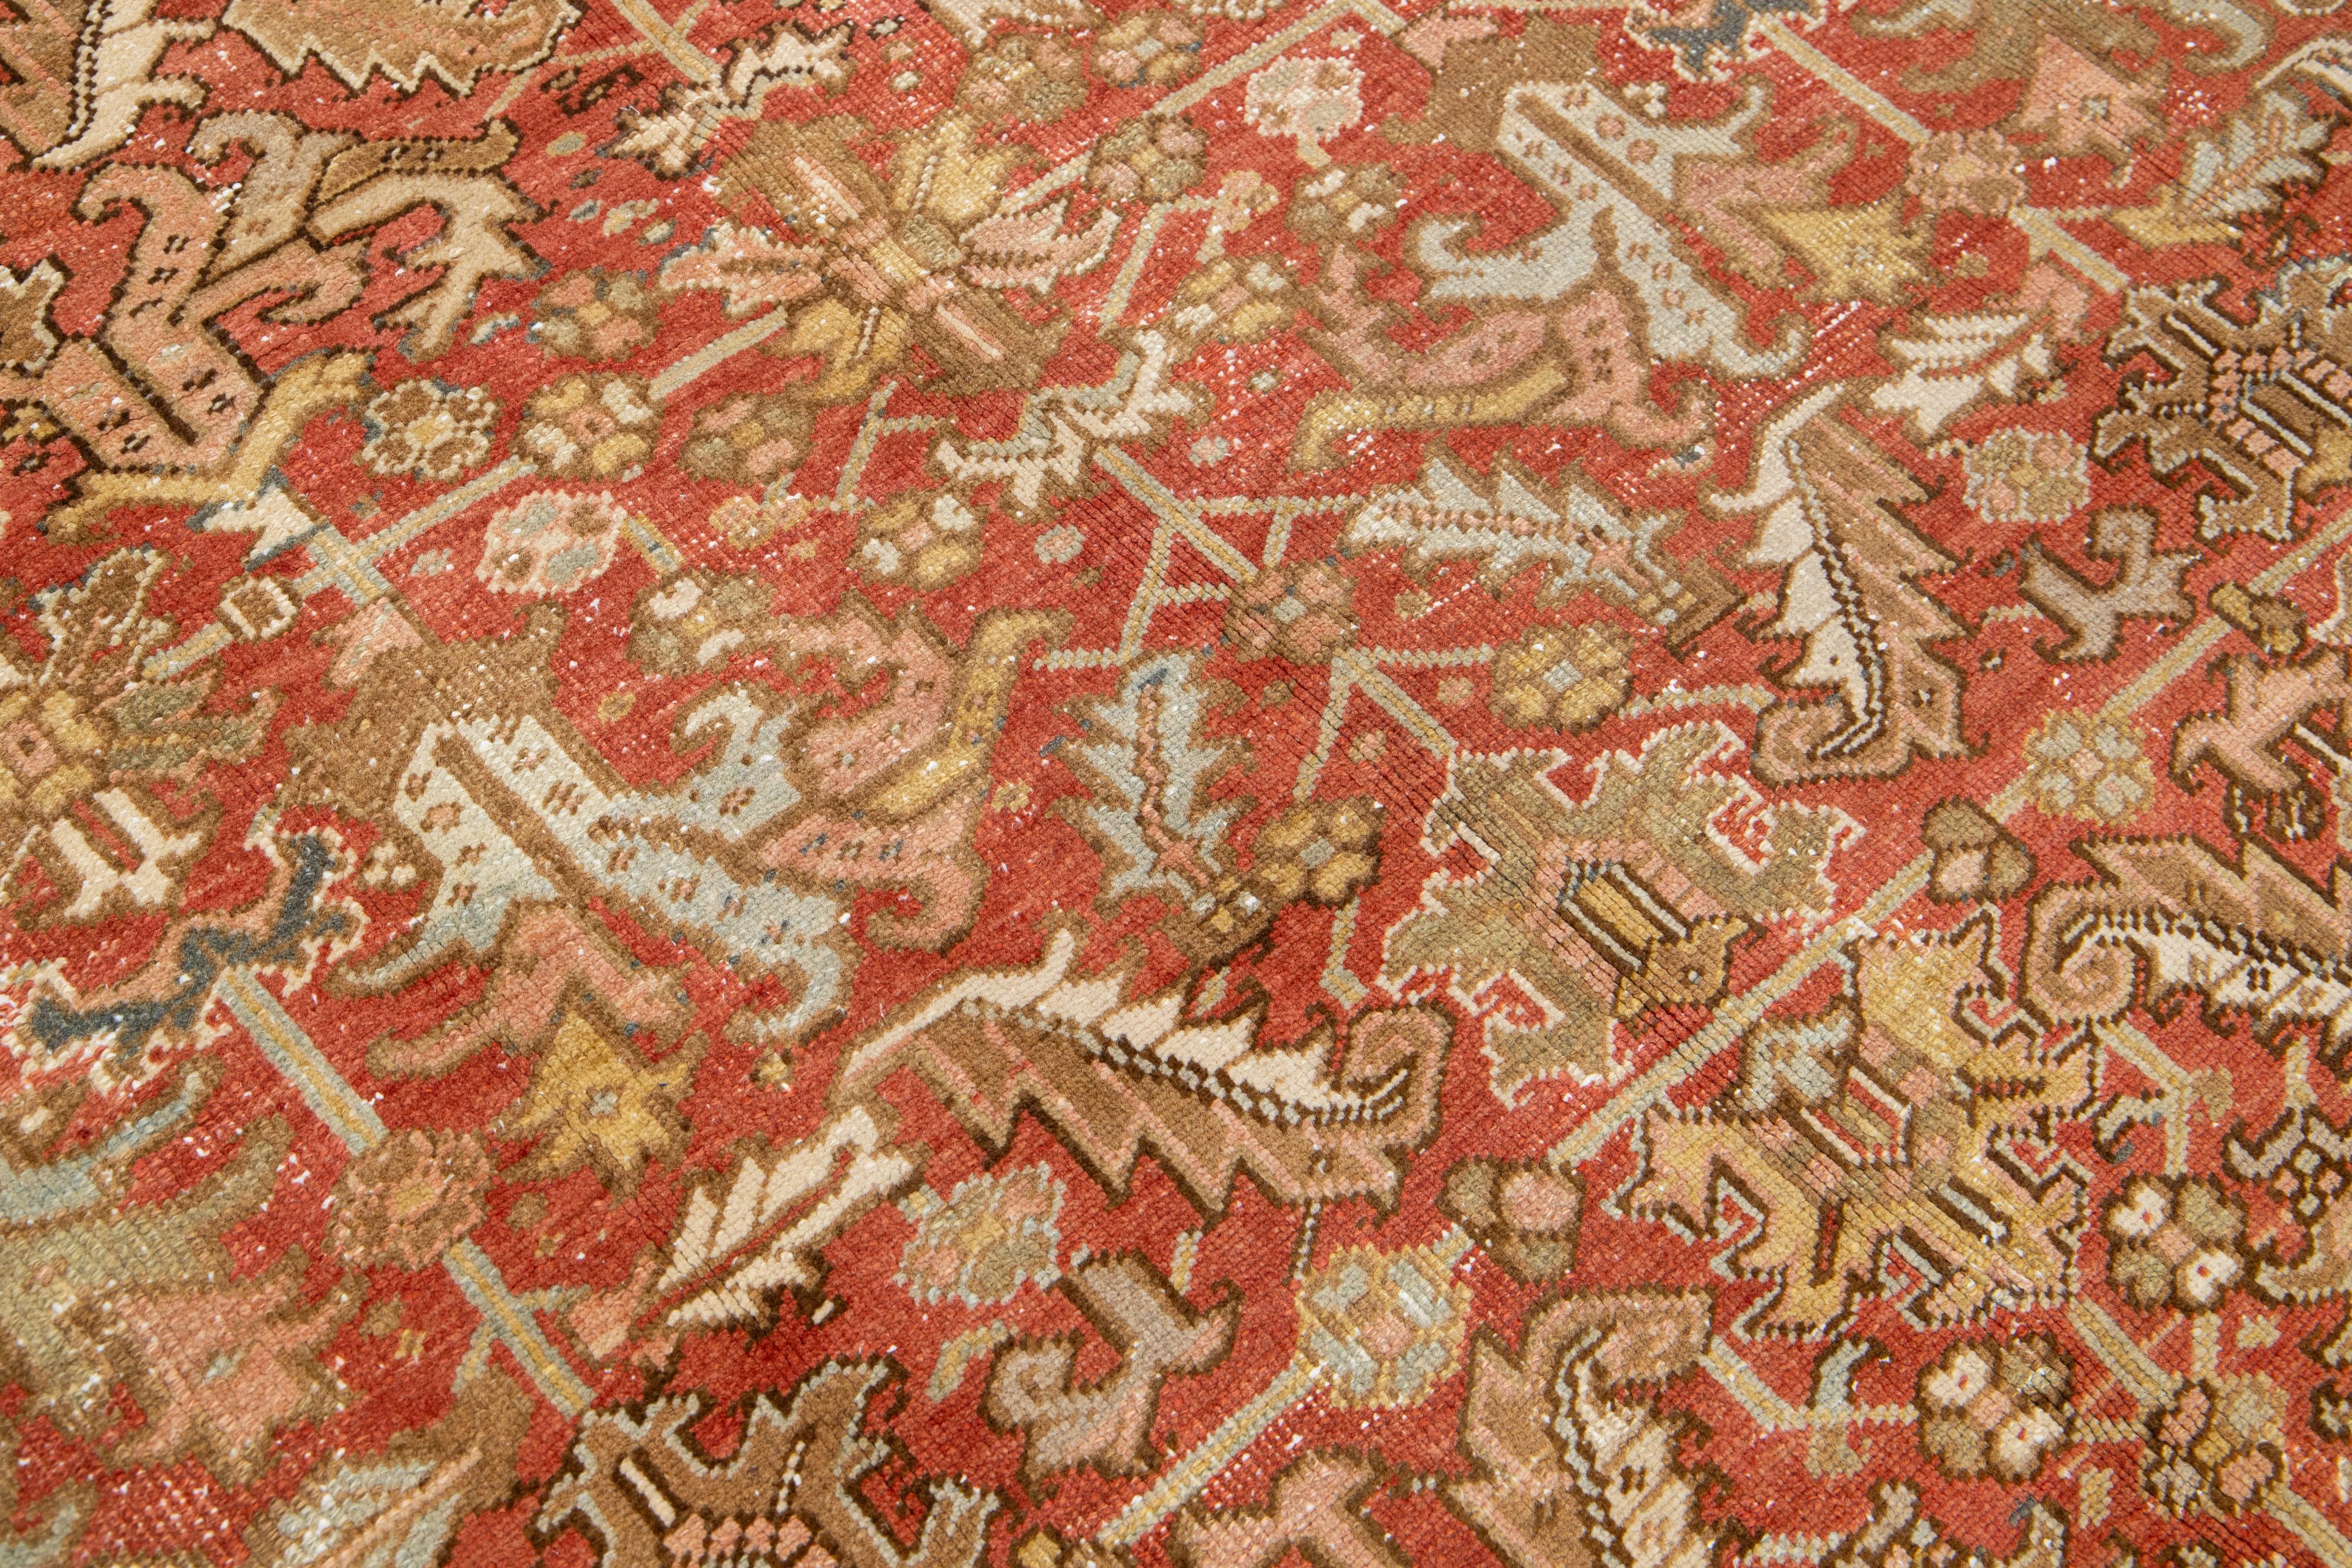 Allover Antique Persian Heriz Wool Rug In Rust Color From The 1920s For Sale 1